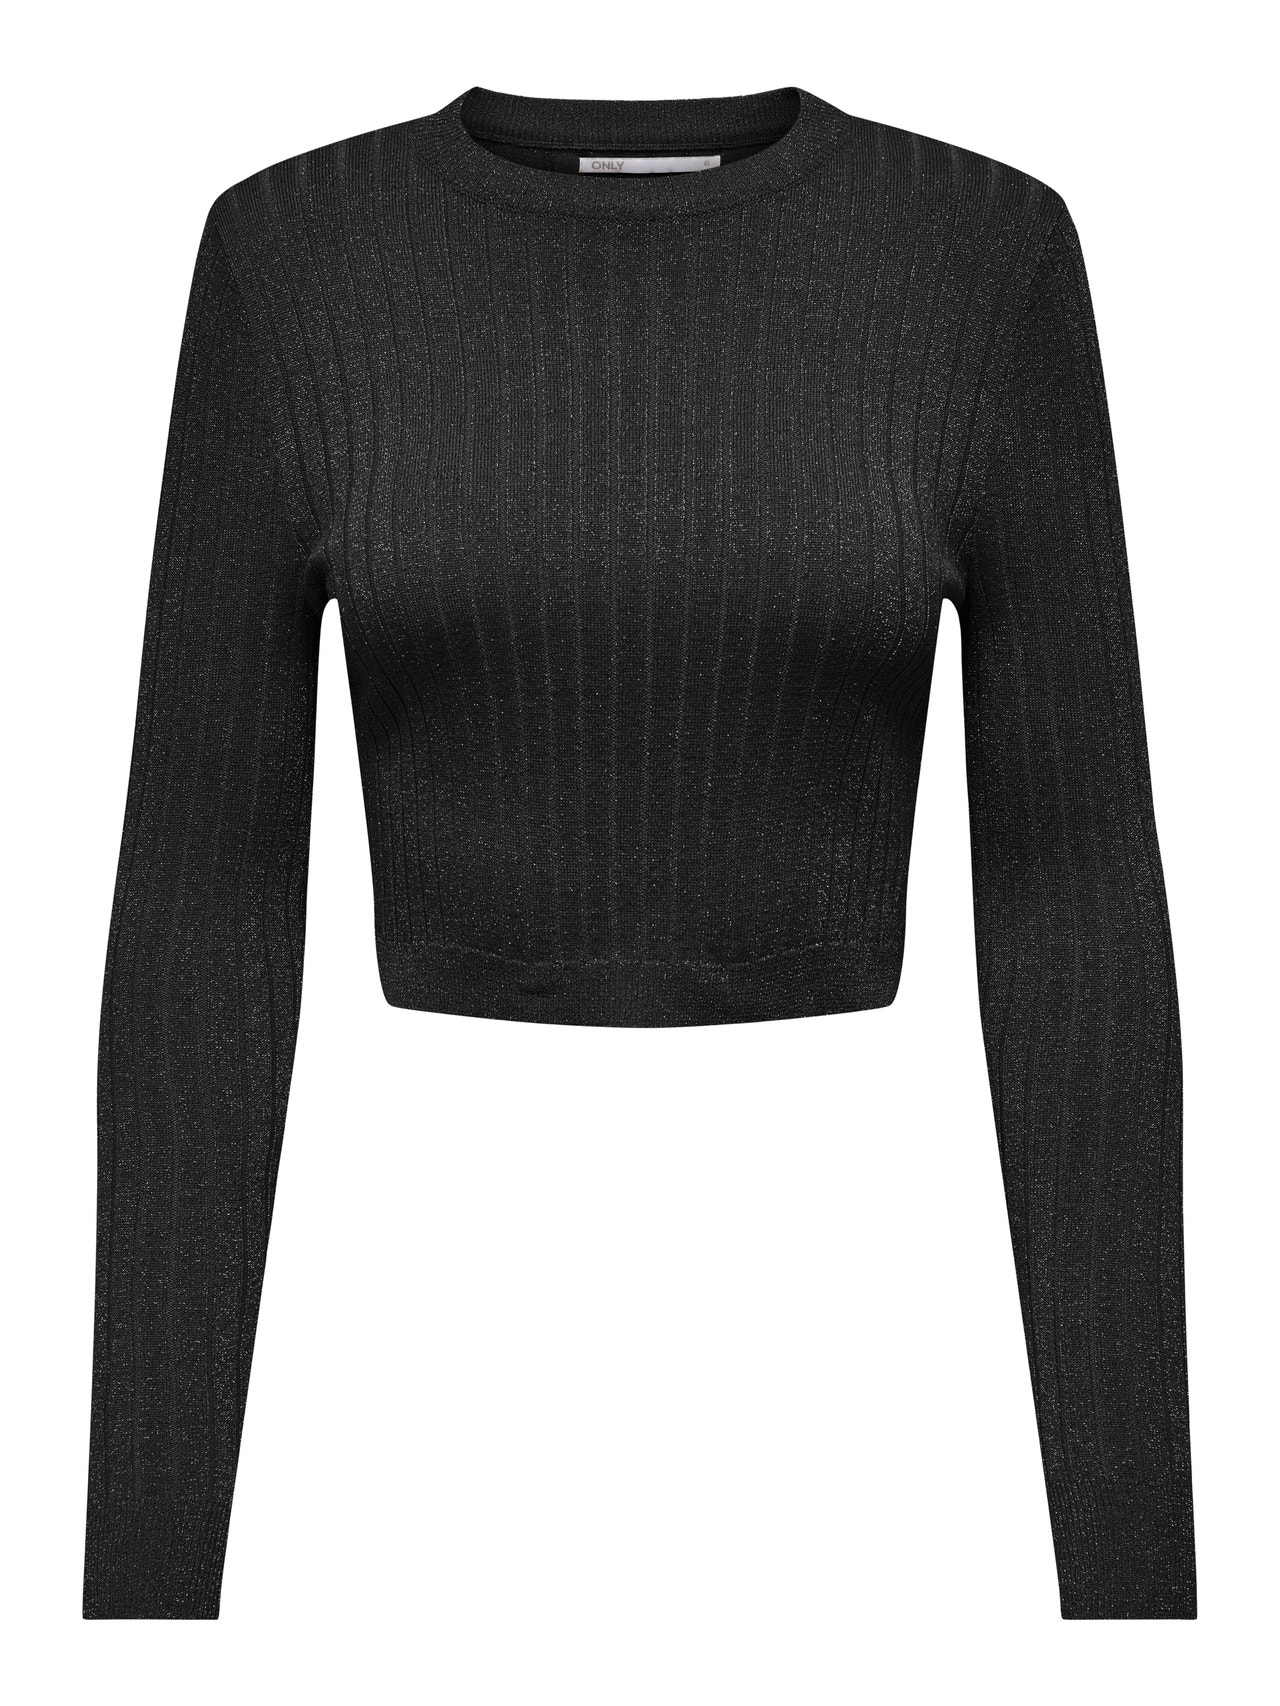 ONLY Round Neck Pullover -Black - 15267578